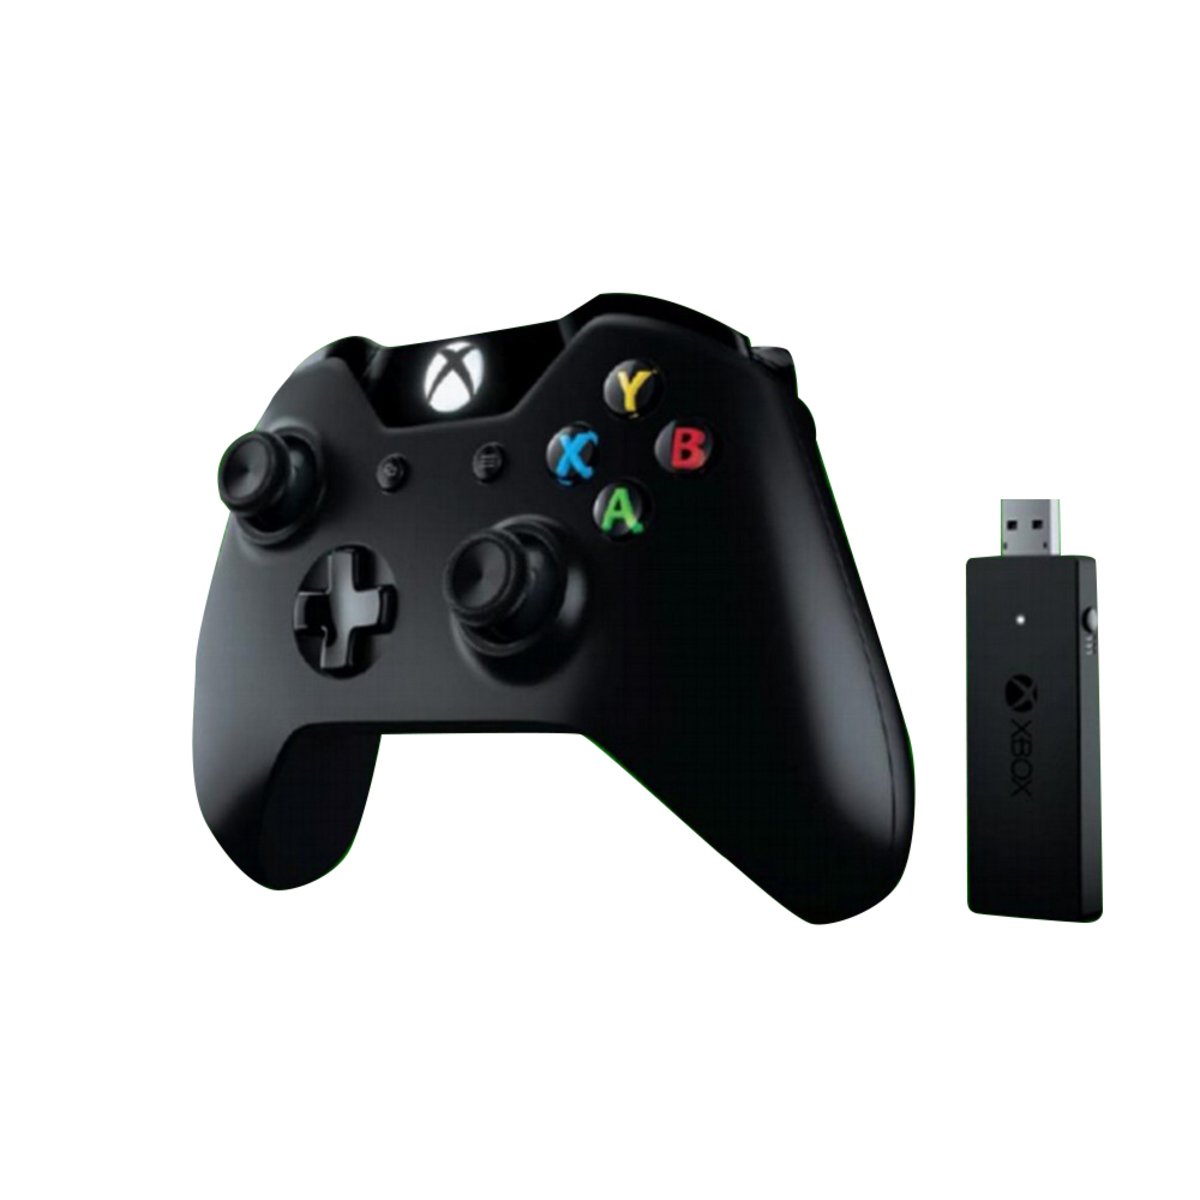 Xbox One PC Wireless Controller for Windows 10 NG6-00003